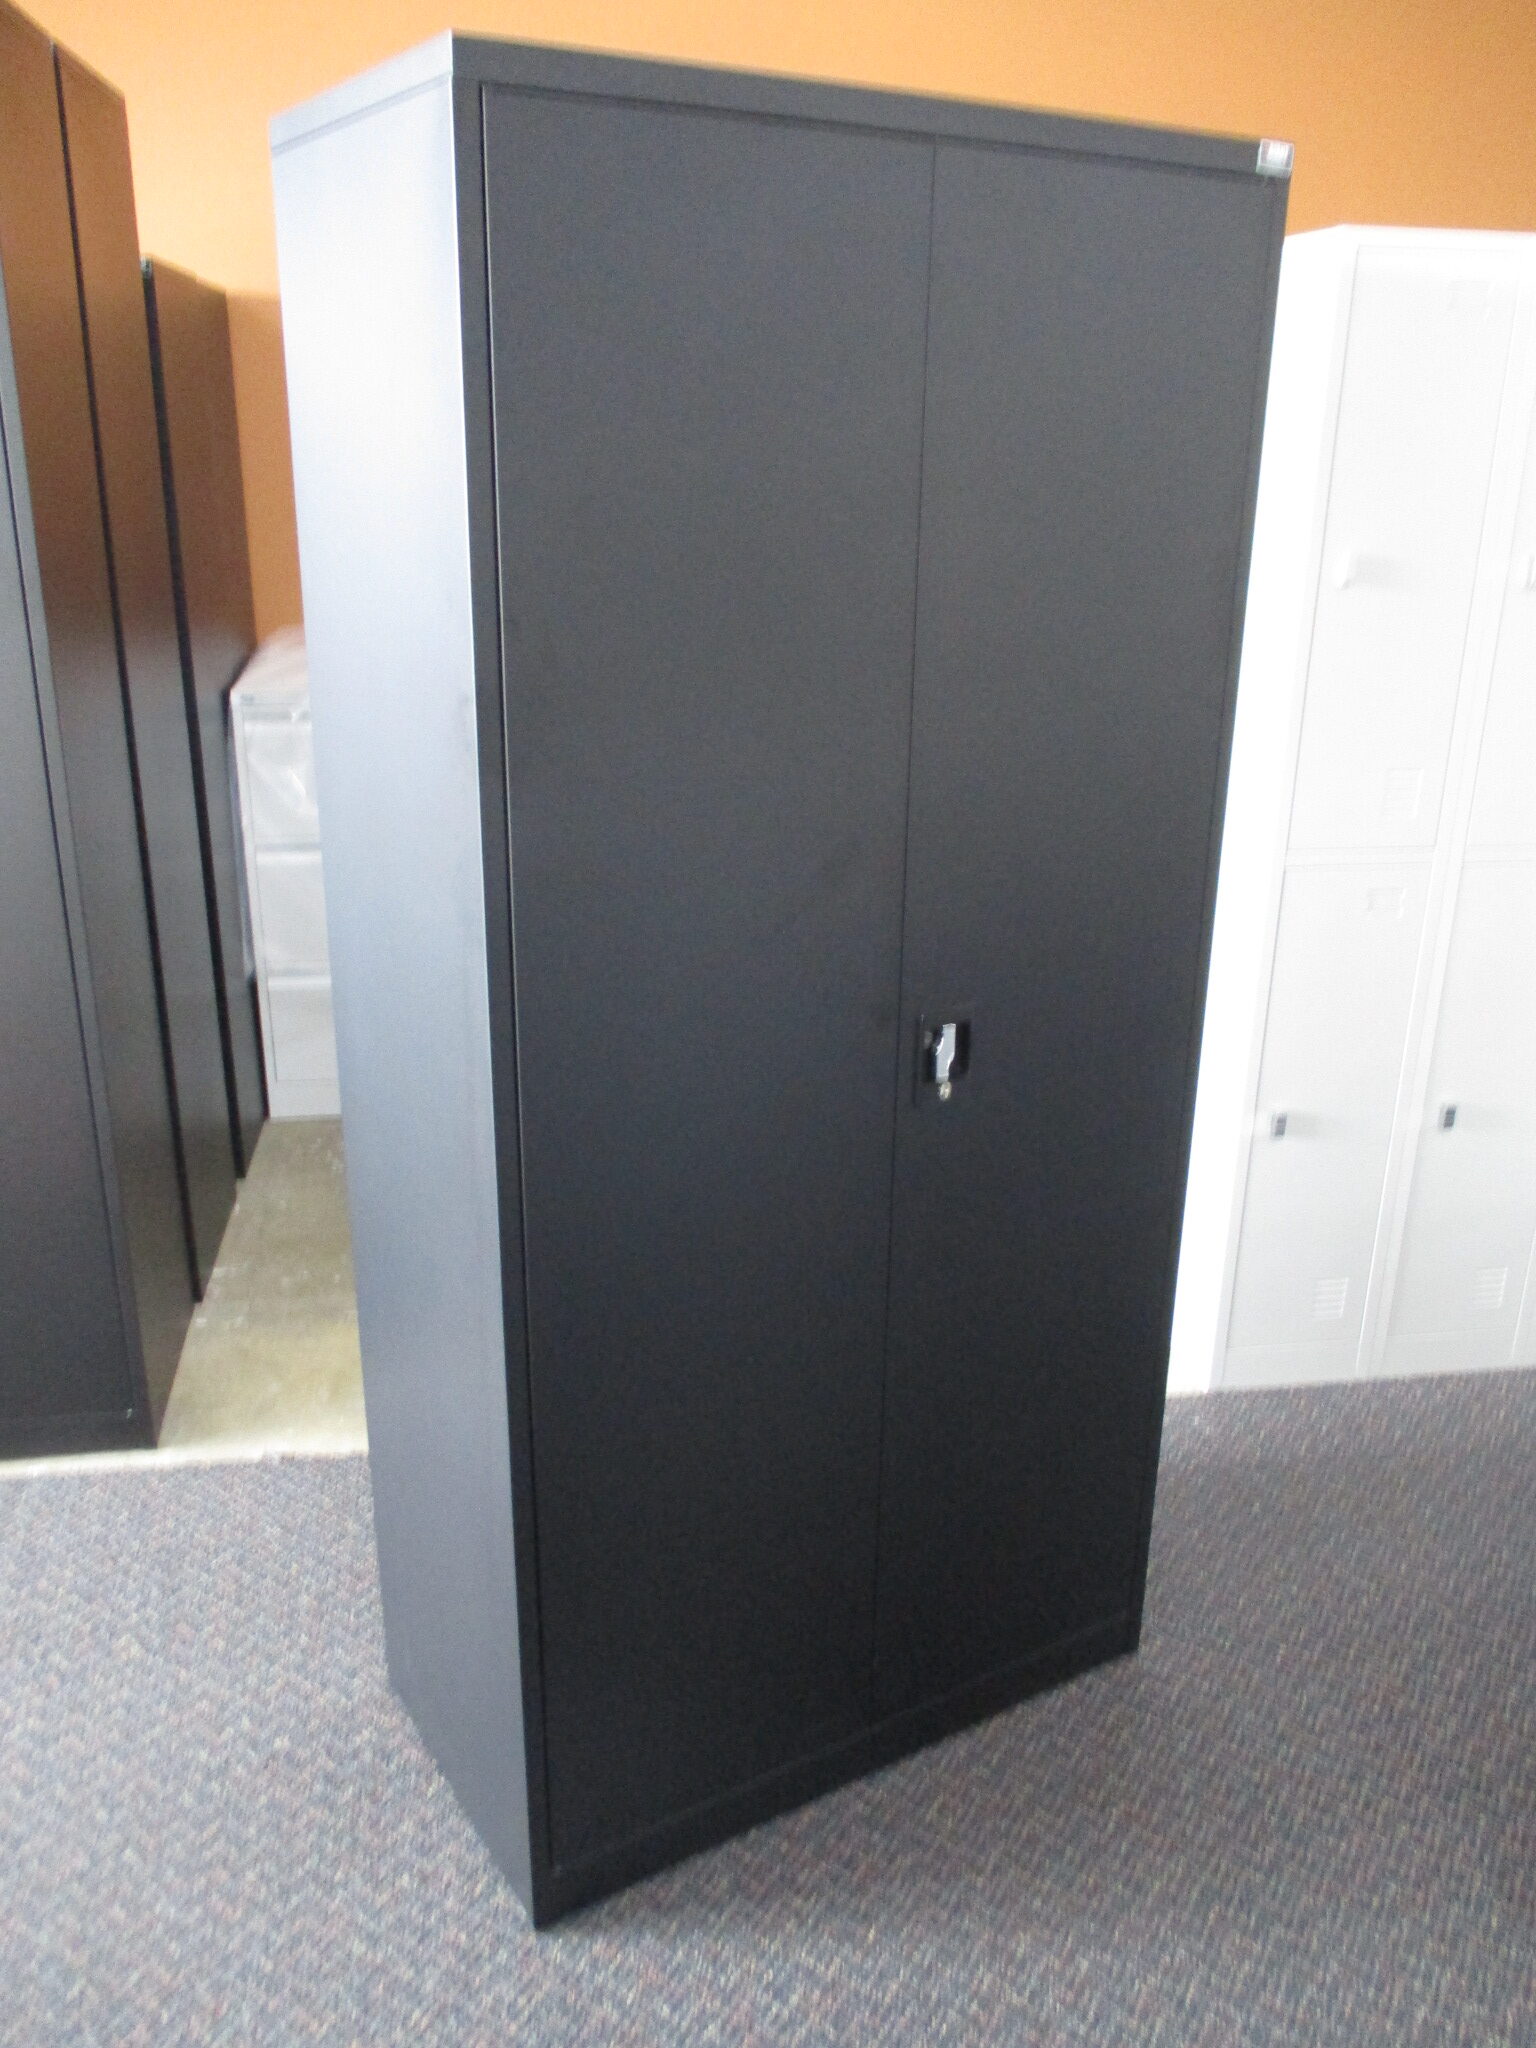 New Black Stationery Cabinets $330